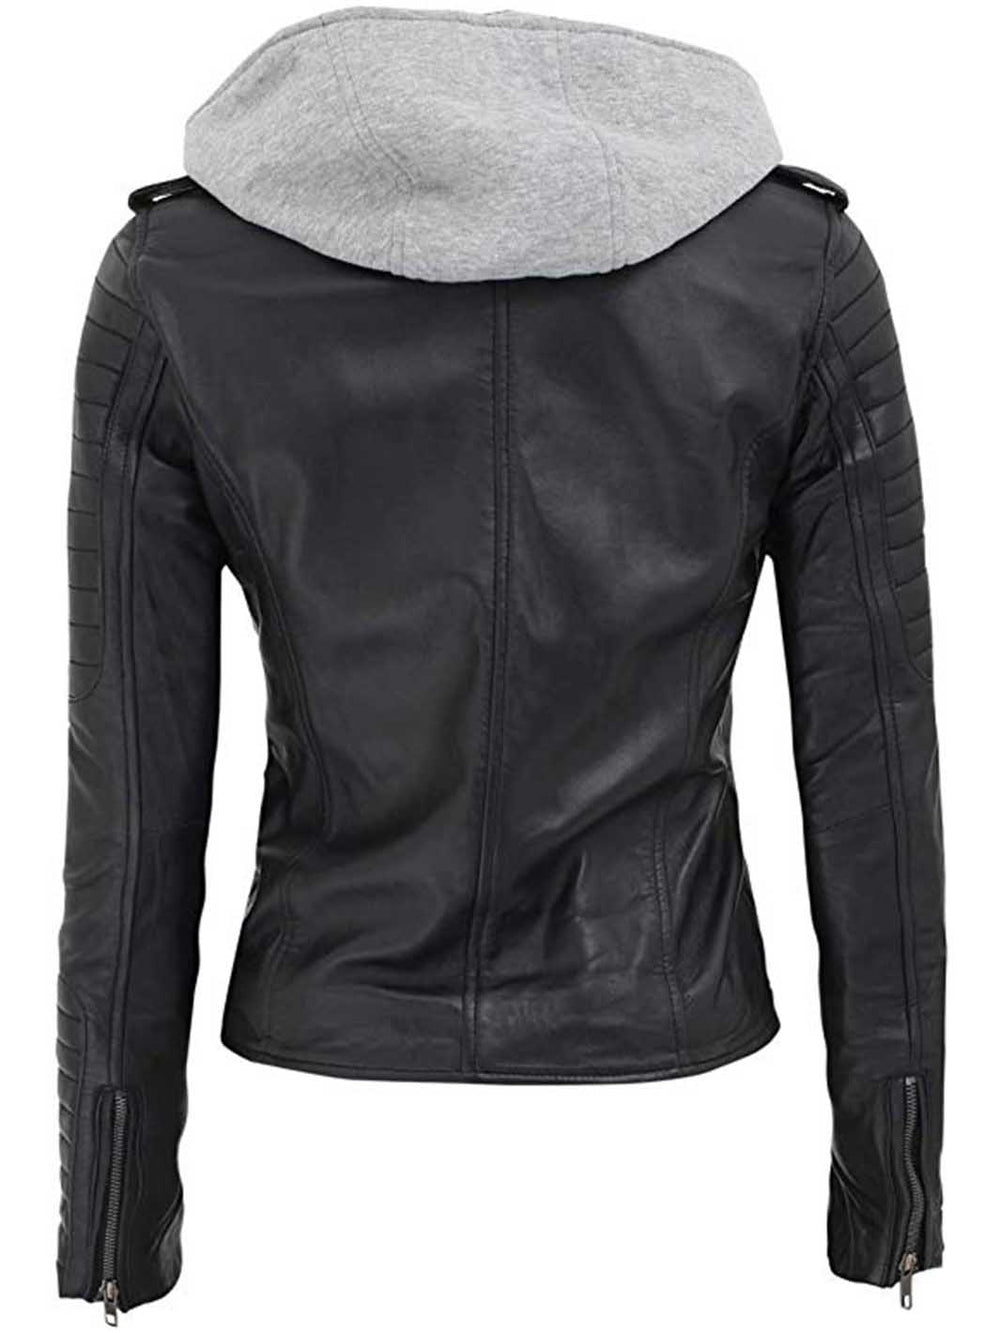 Bagheria Women Leather Jacket With Hood